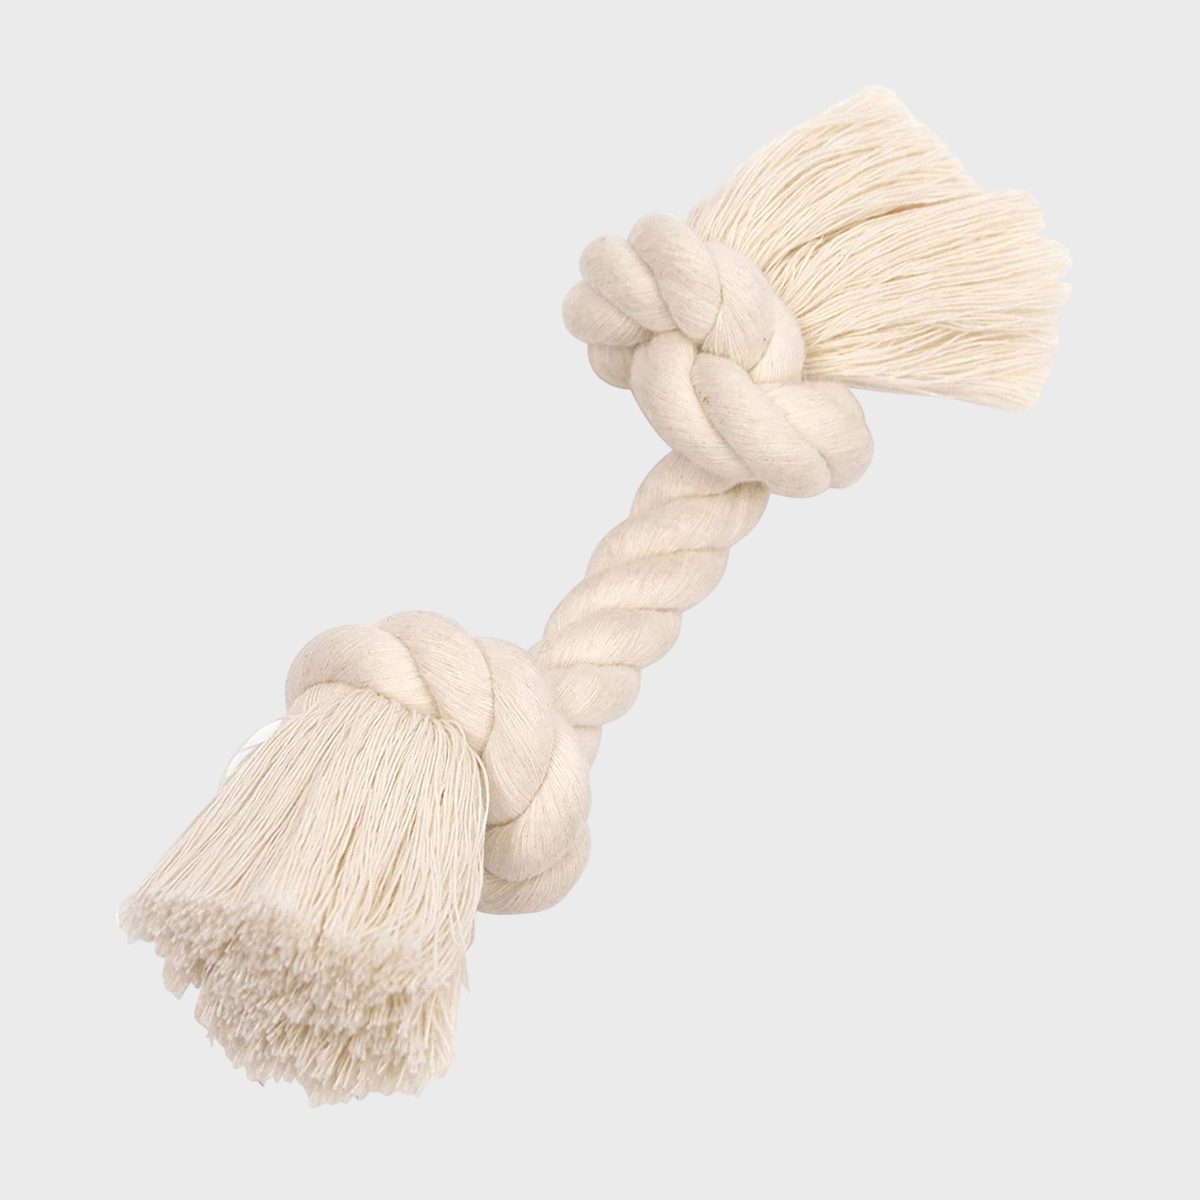 https://www.rd.com/wp-content/uploads/2021/06/Flossy-Chew-Rope-Toy_ecomm_via-amazon.com_.jpg?fit=700%2C700